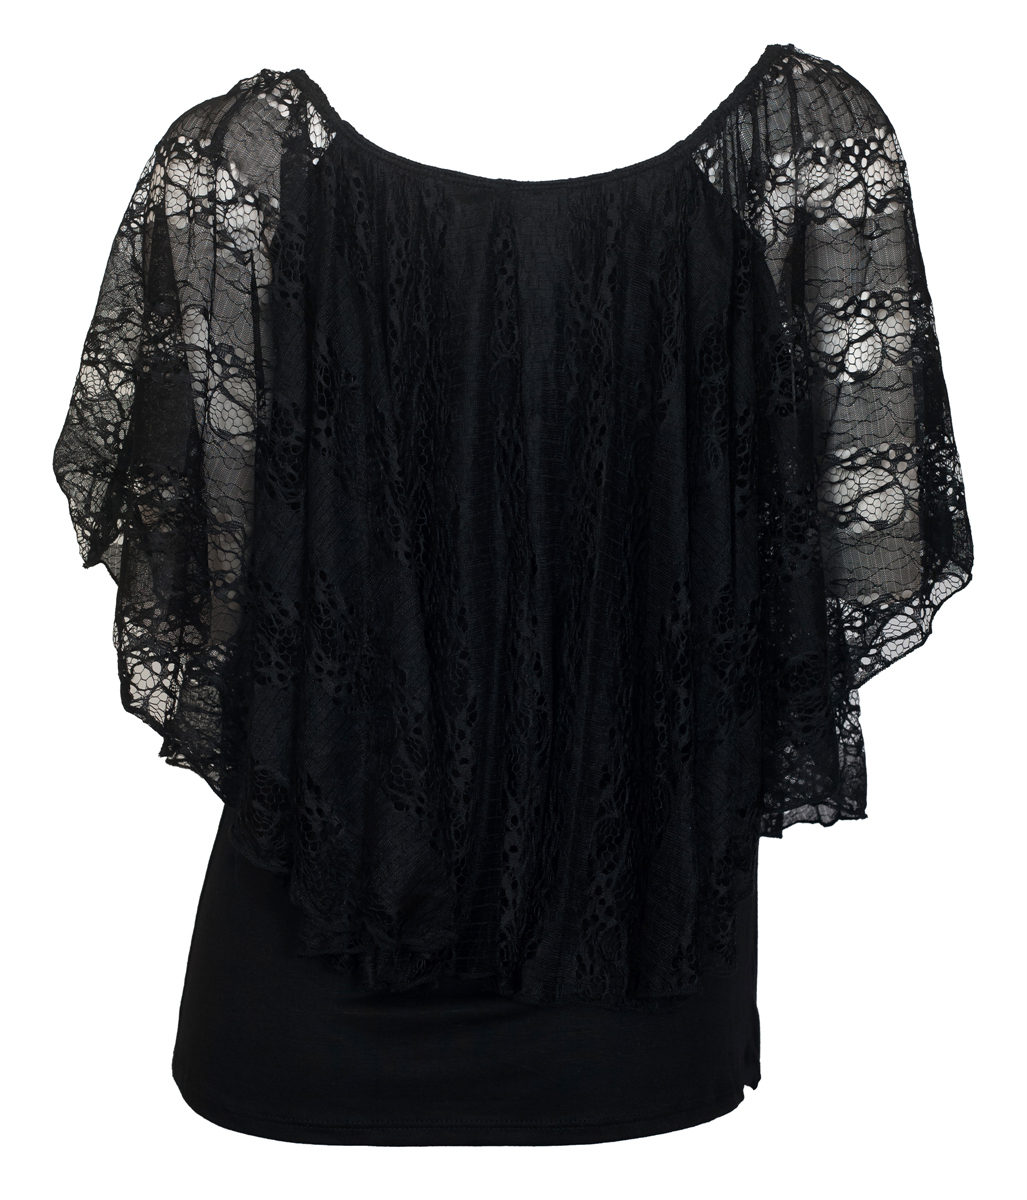 Plus Size Lined Sheer Lace Poncho Top Black | eVogues Apparel